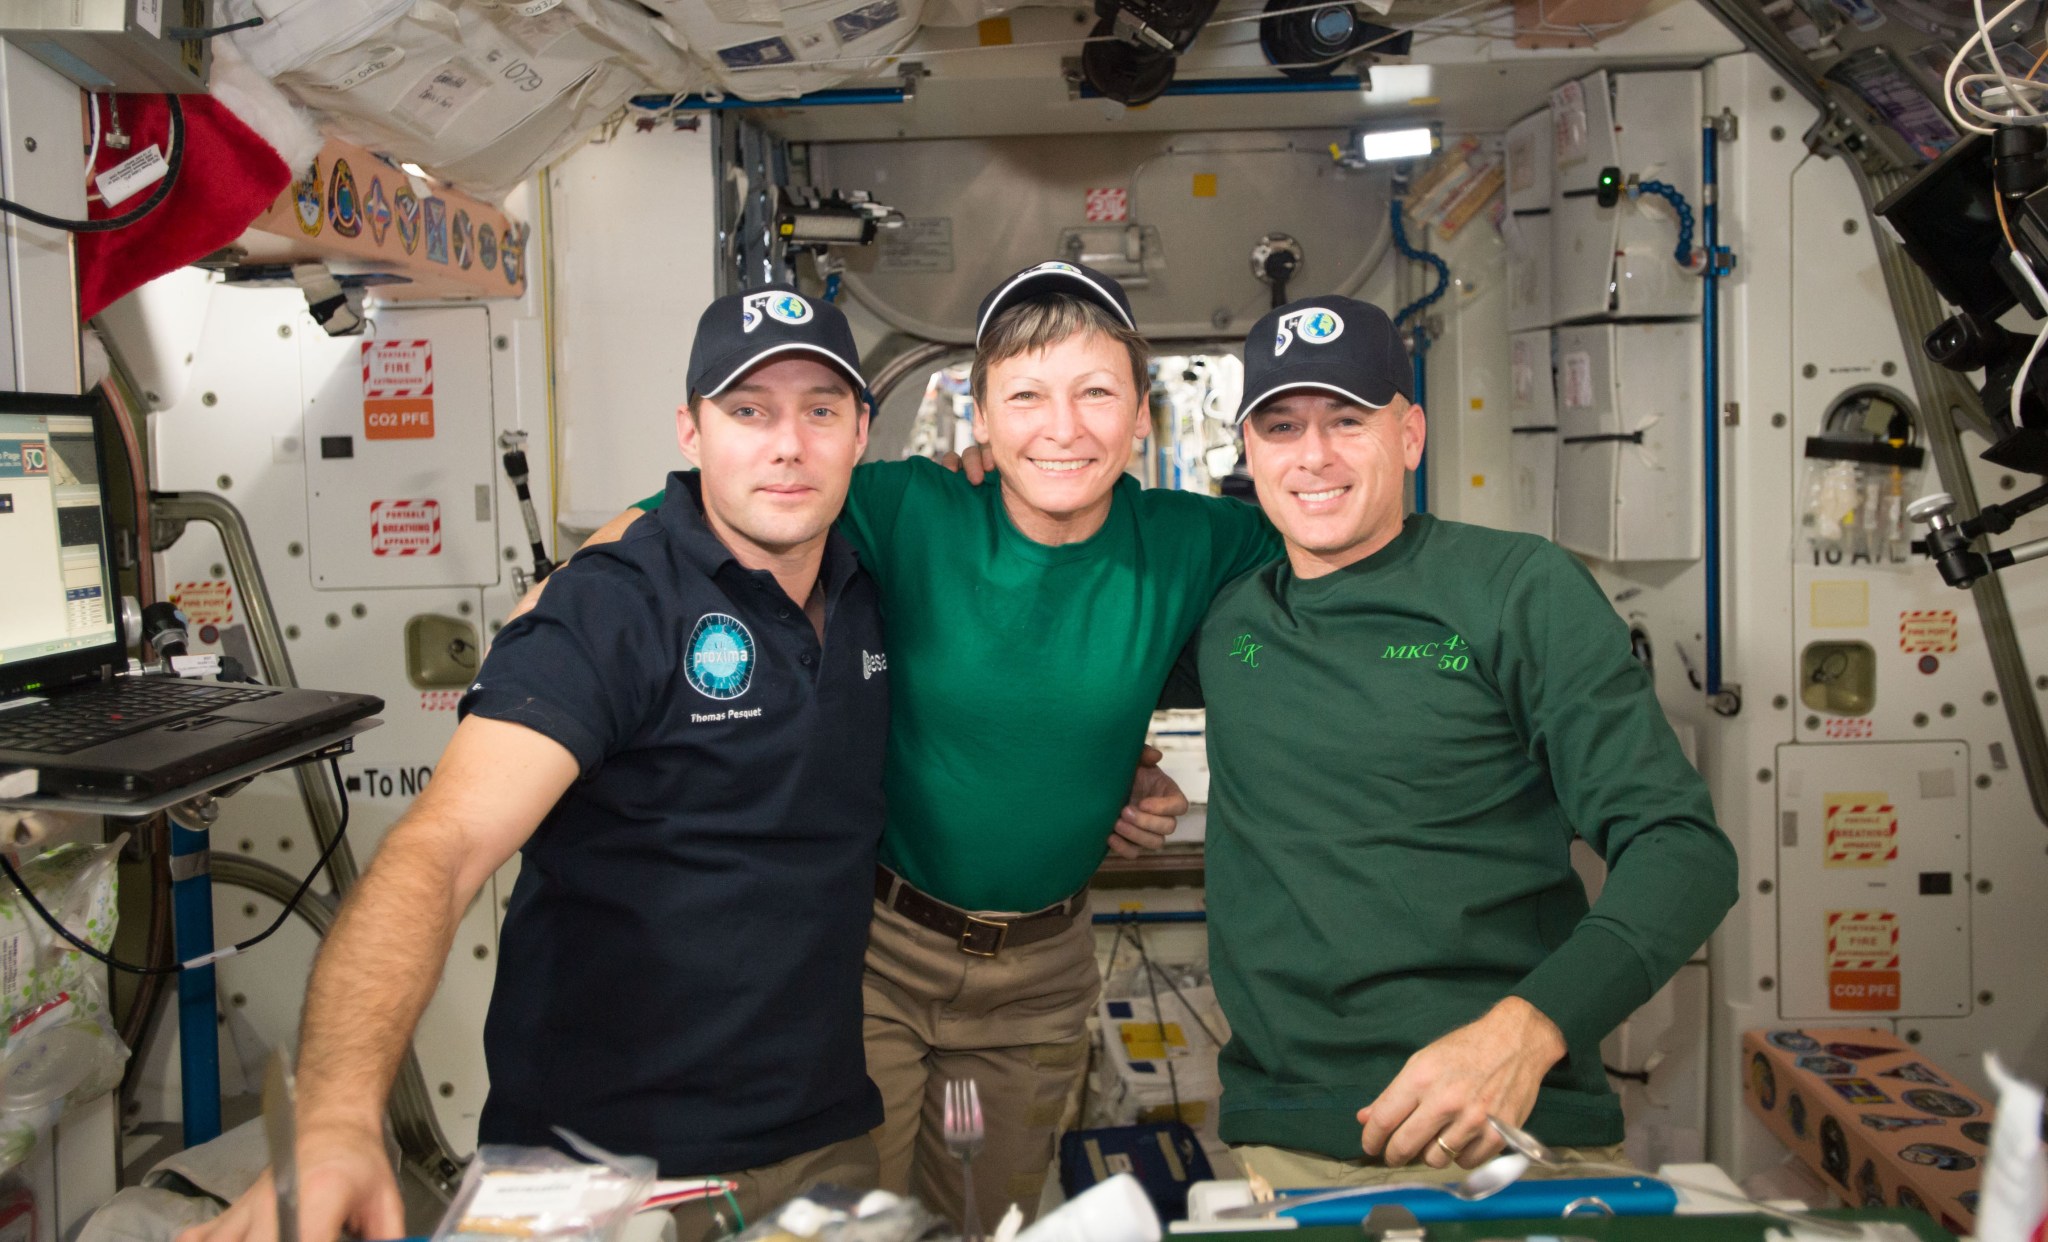 From left to right: ESA astronaut Thomas Pesquet, Peggy Whitson and Shane Kimbrough.